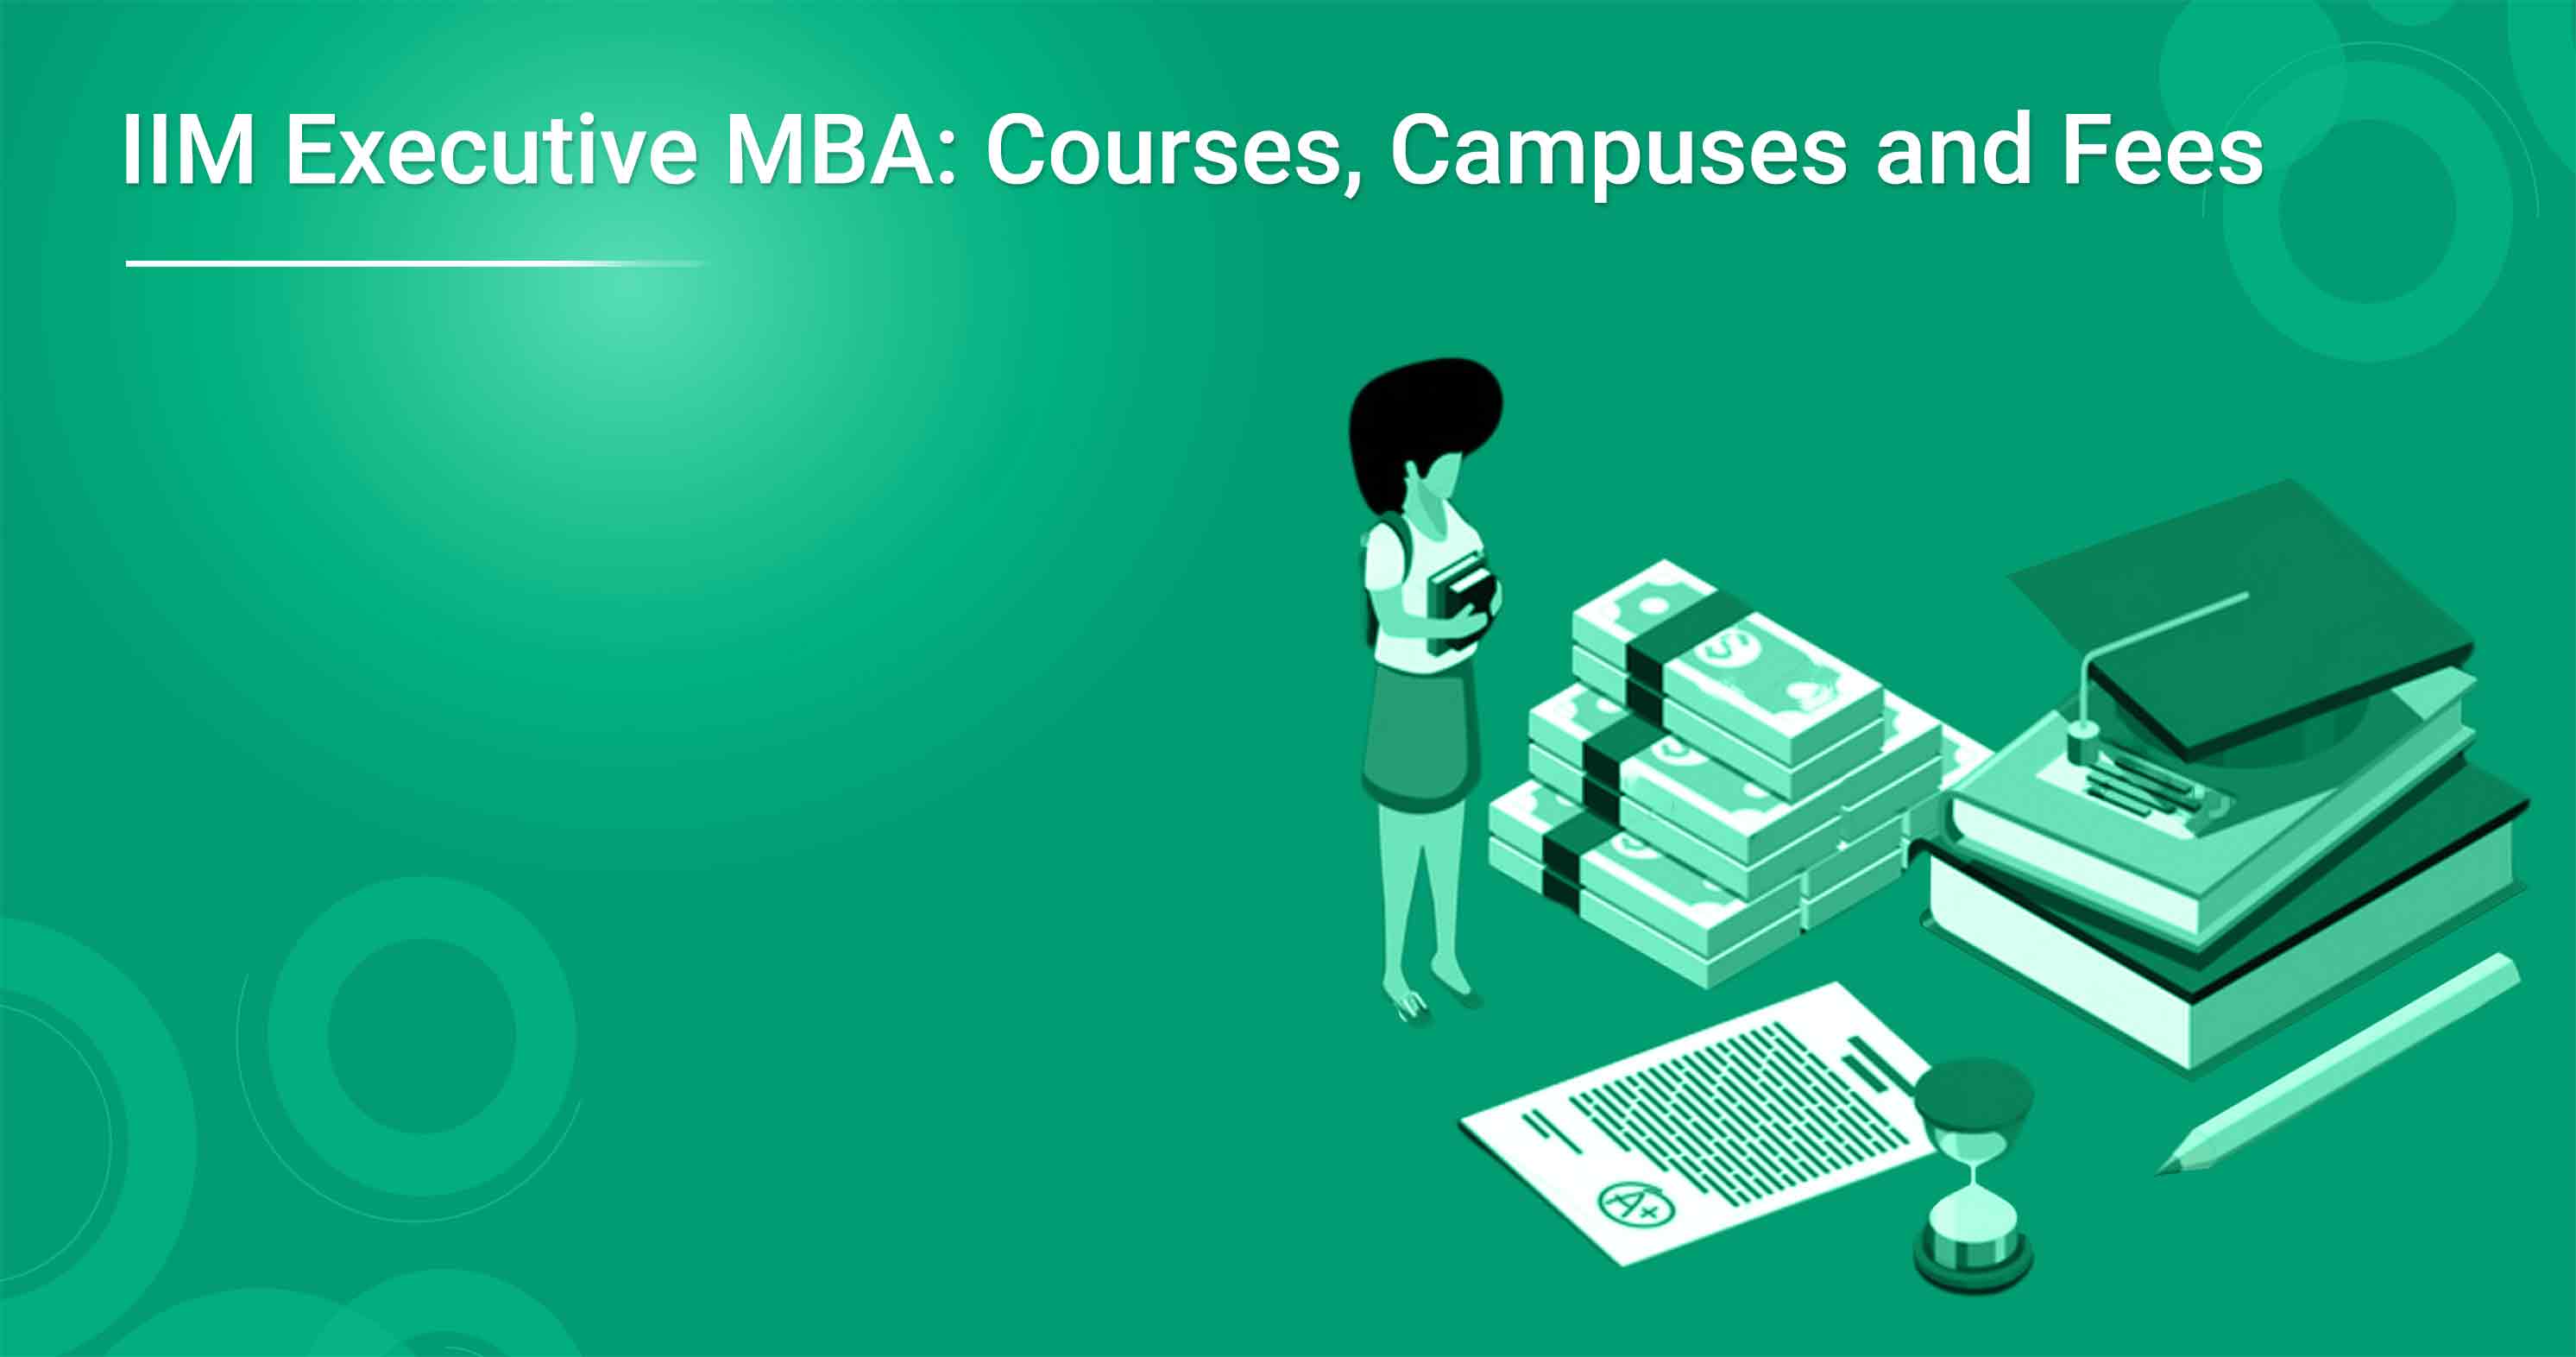 IIM Executive MBA: Courses, Campuses and Fees